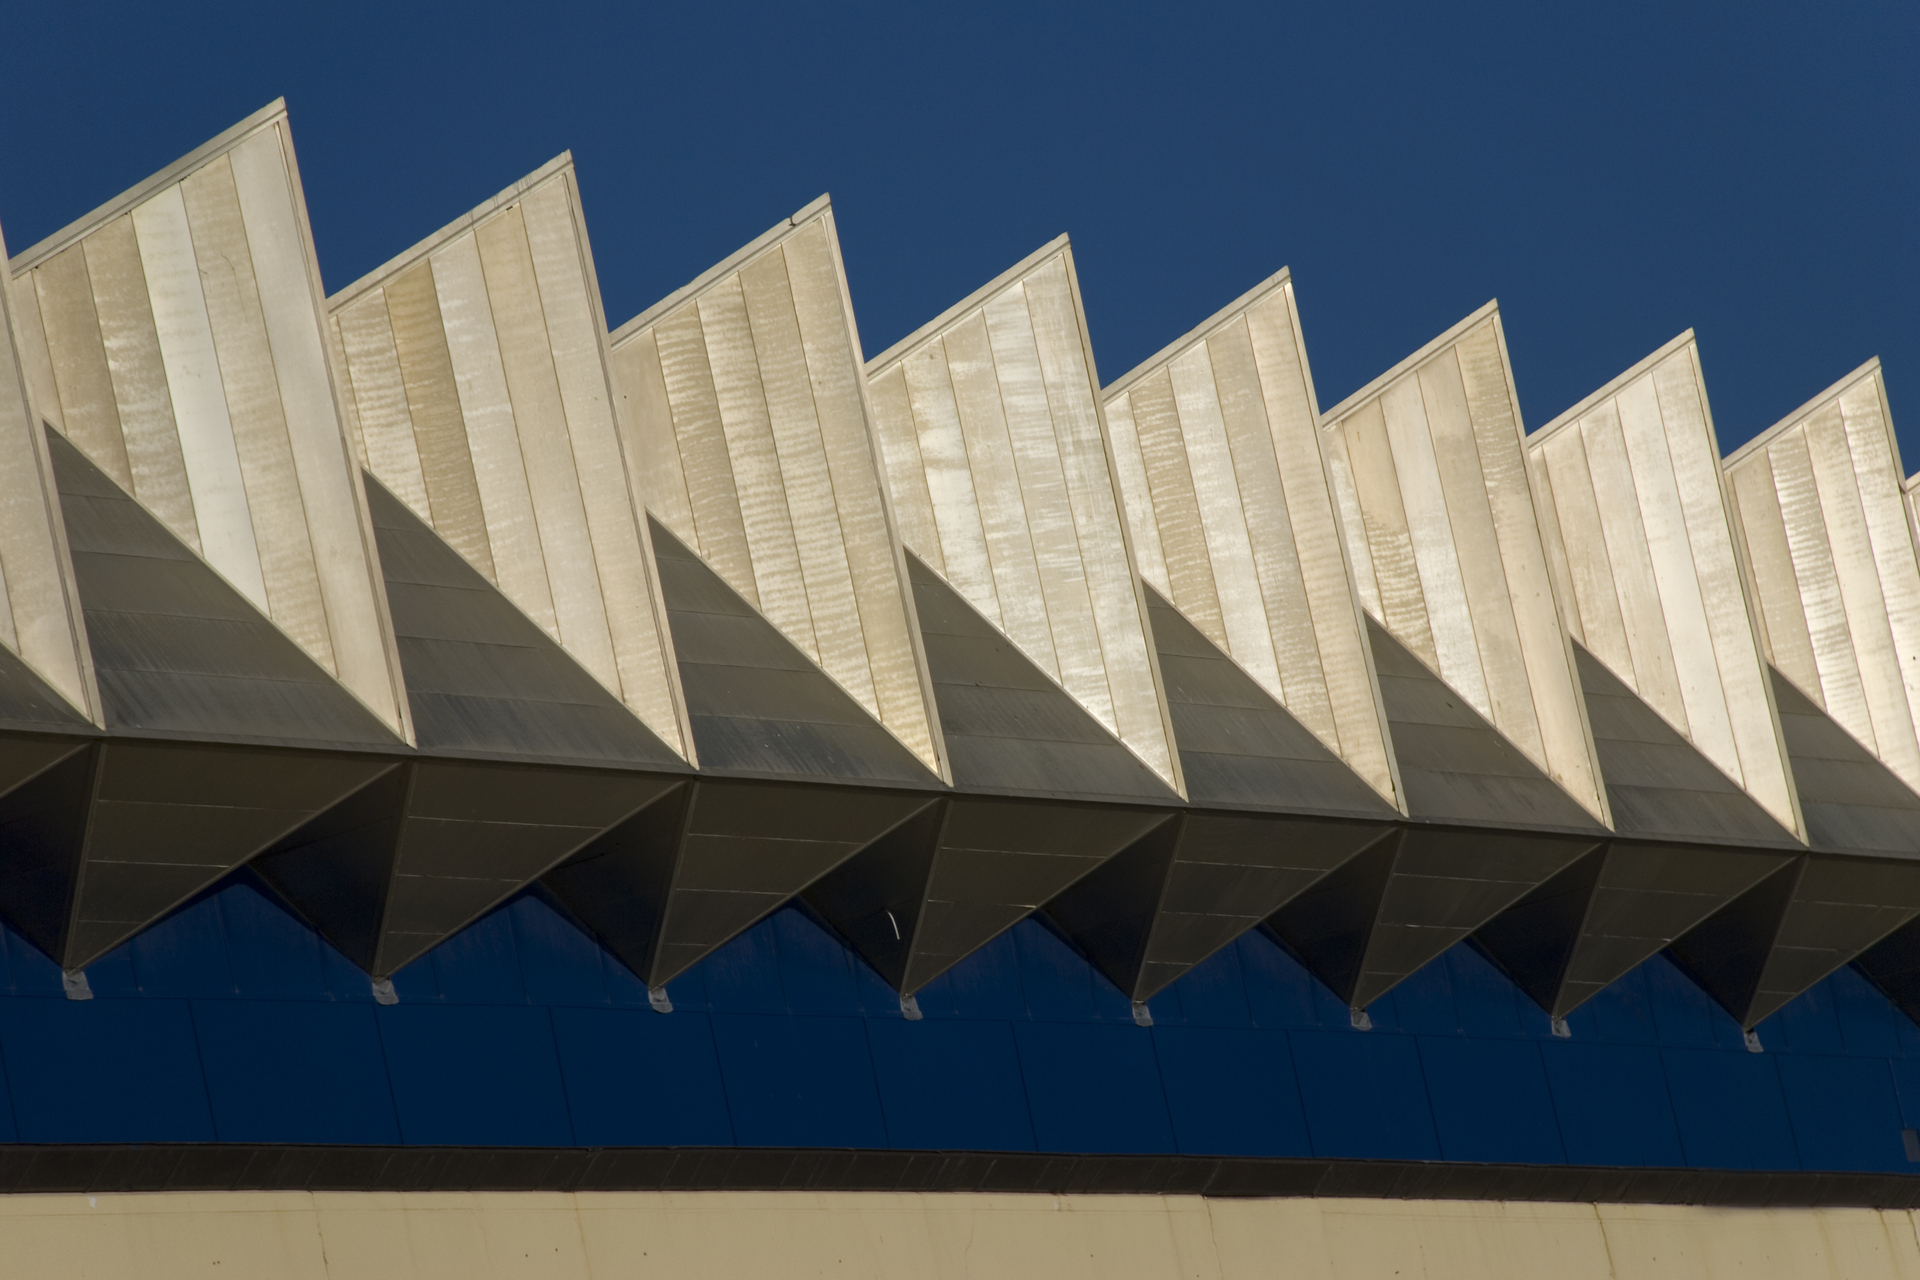 Part of a building roofline abstract on a blue sky background in wintertime